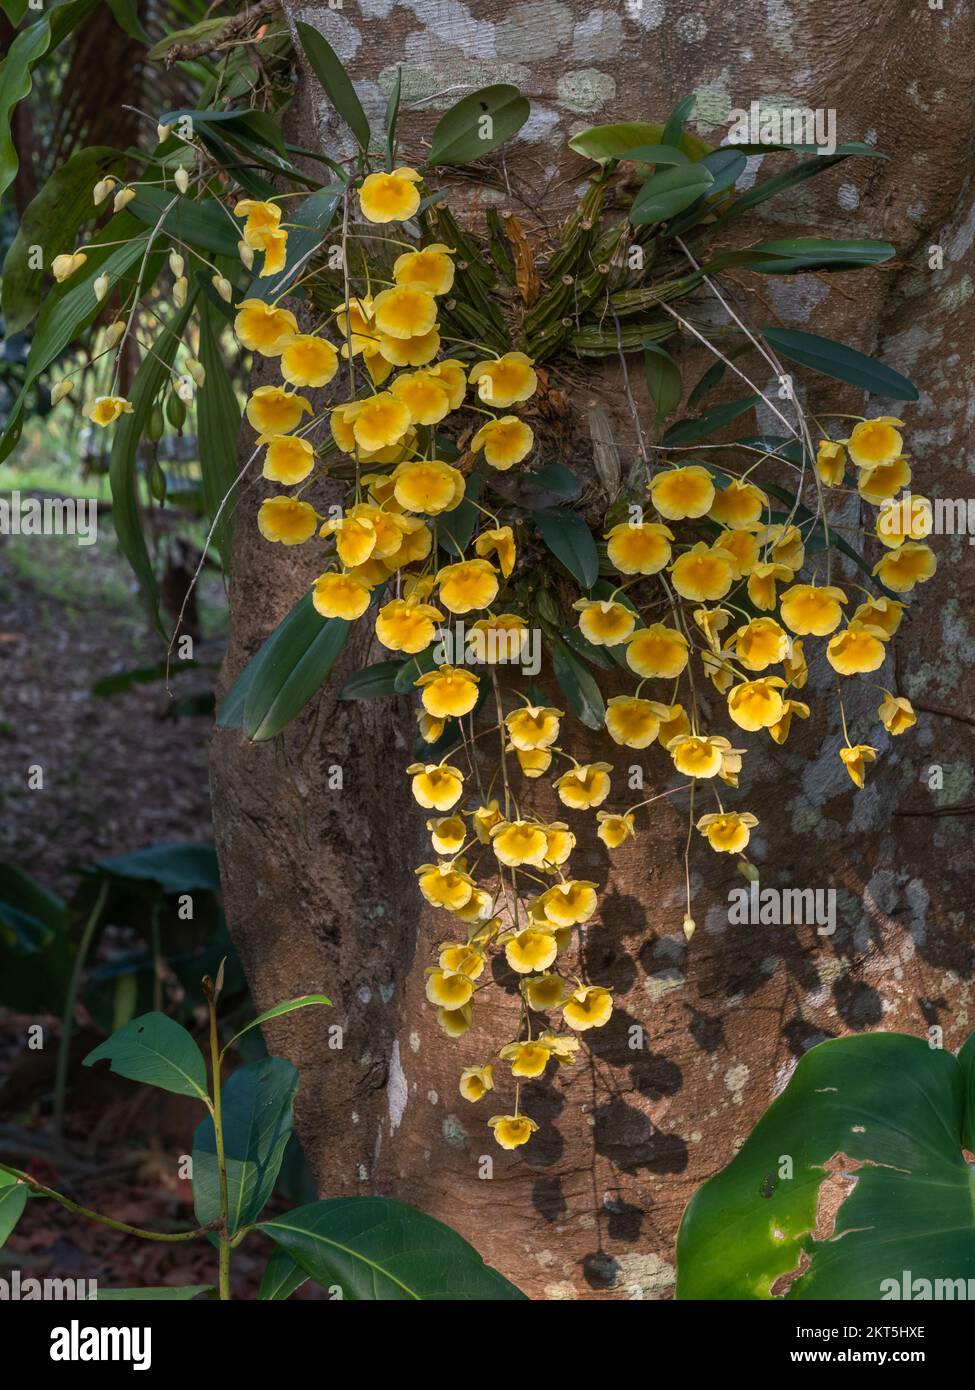 Bright yellow orange flowers of epiphytic orchid species dendrobium lindleyi aka Lindley's dendrobium blooming in spring in tropical garden Stock Photo